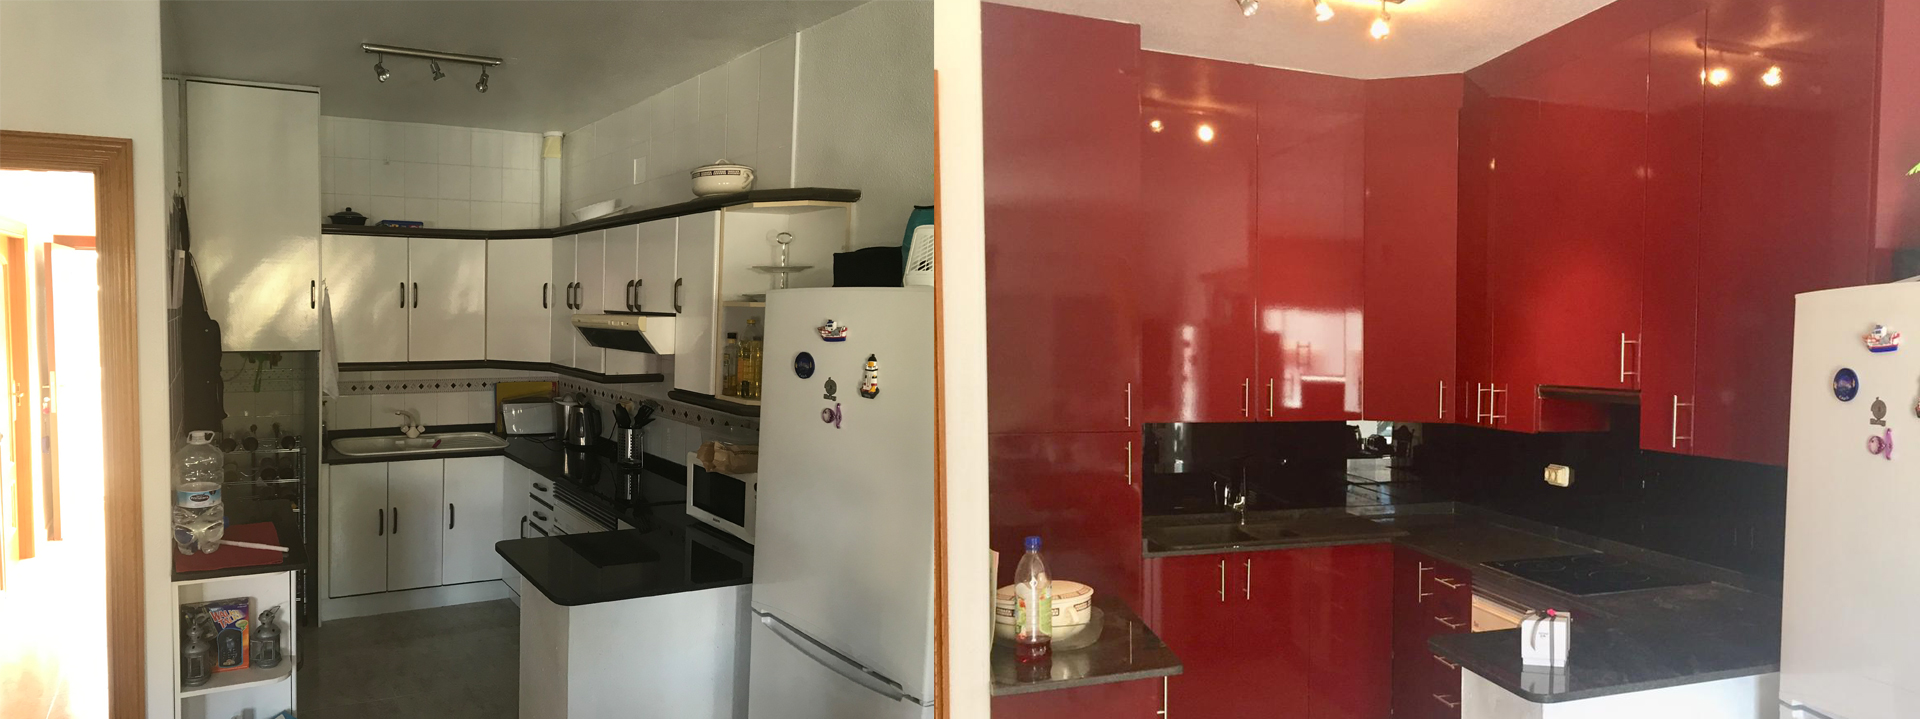 Kitchen-renovation-before-and-after-3